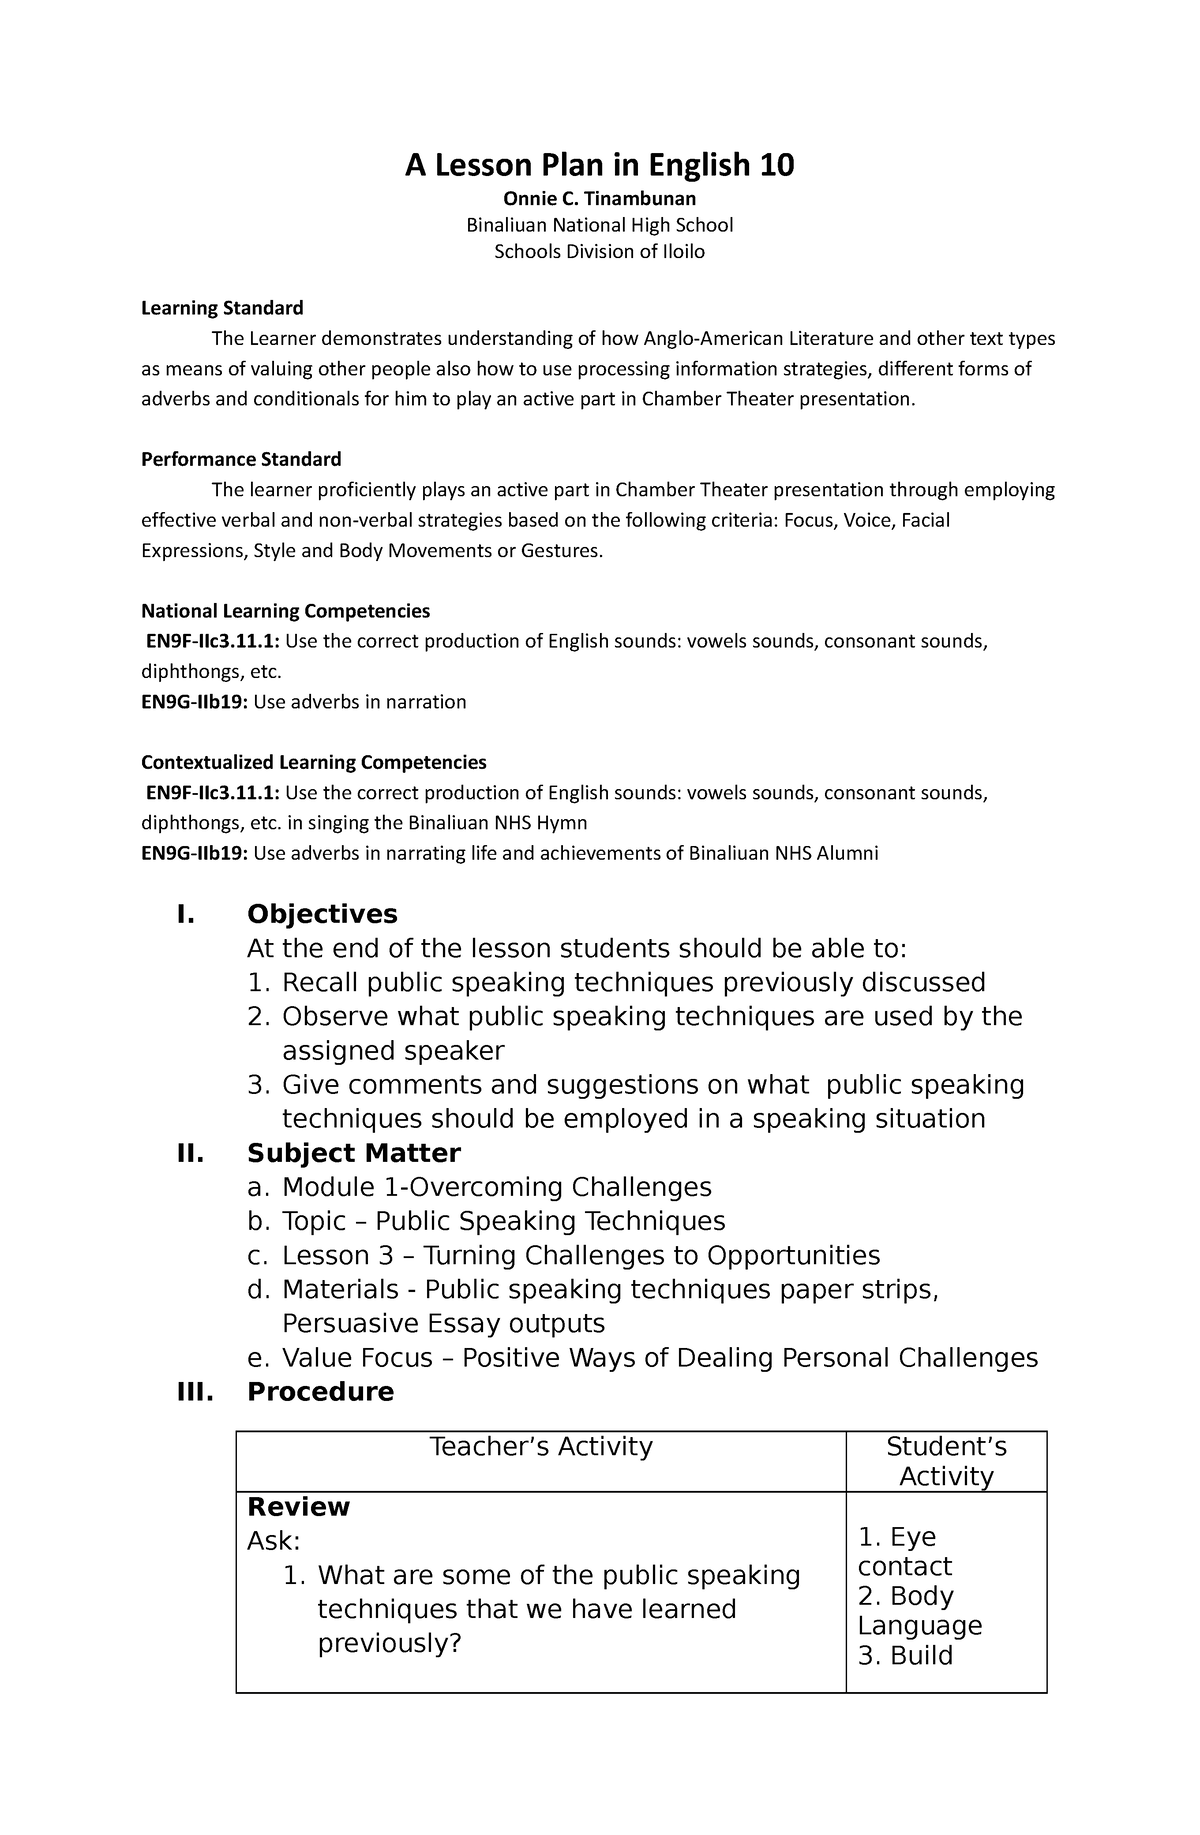 Public-Speaking-2 - Detailed Lesson Plan in English 10 - A Lesson Plan ...